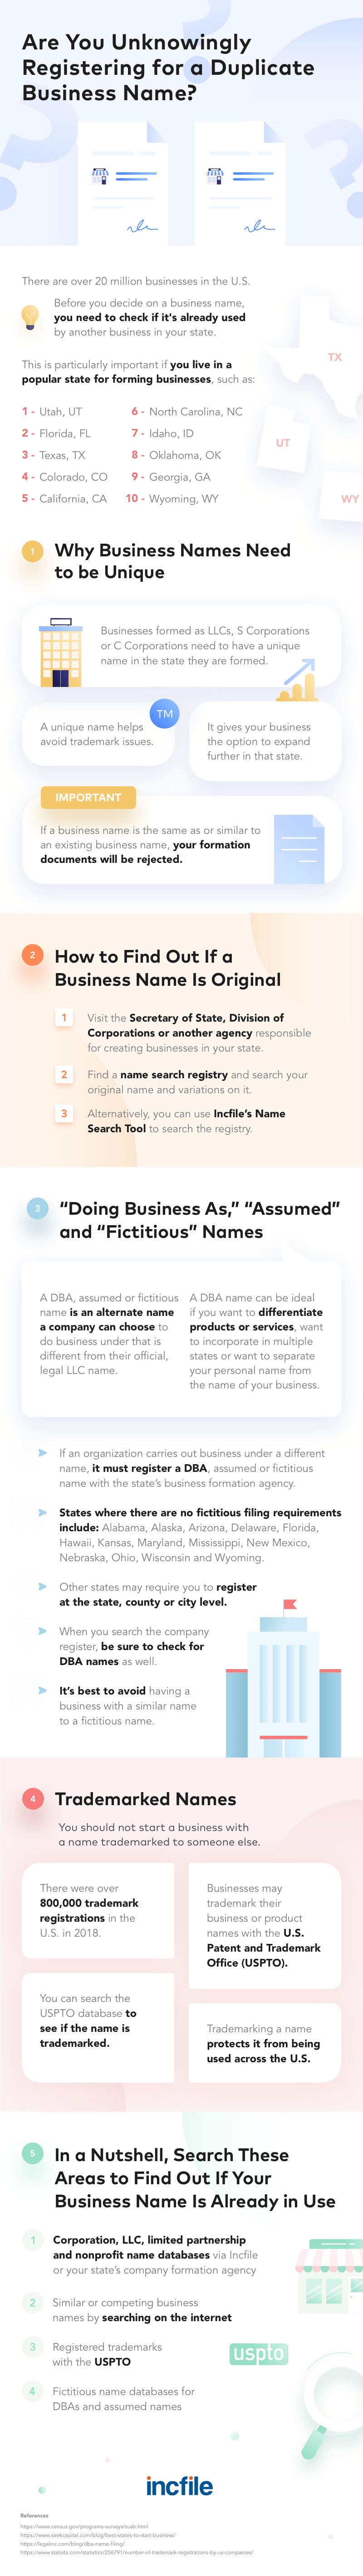 How to Check if a Business Name is Taken - Infographic